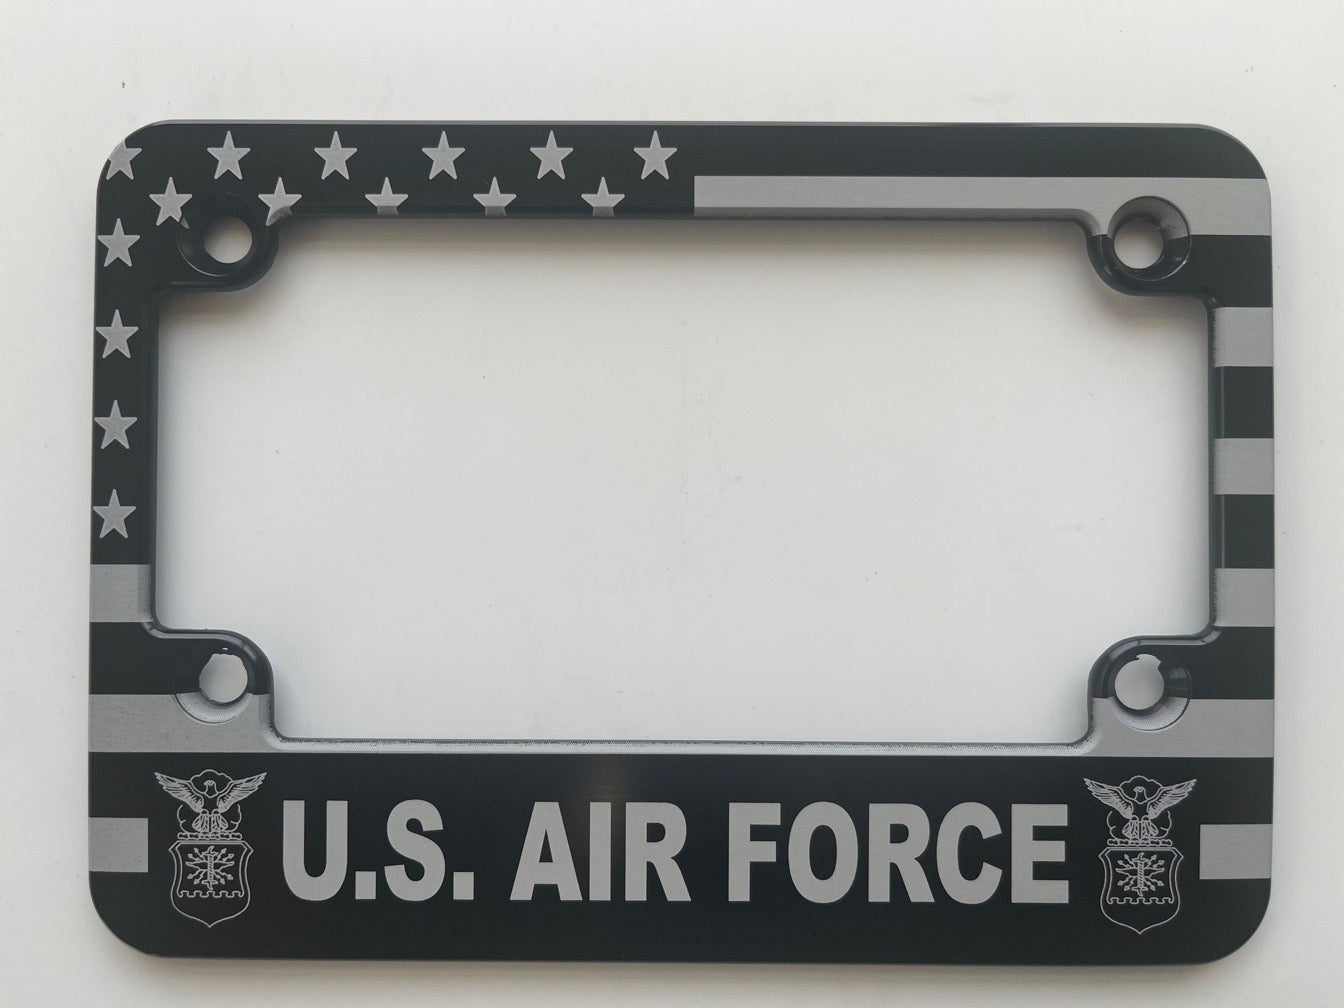 Air Force American Flag Aluminum Motorcycle License Plate Frame